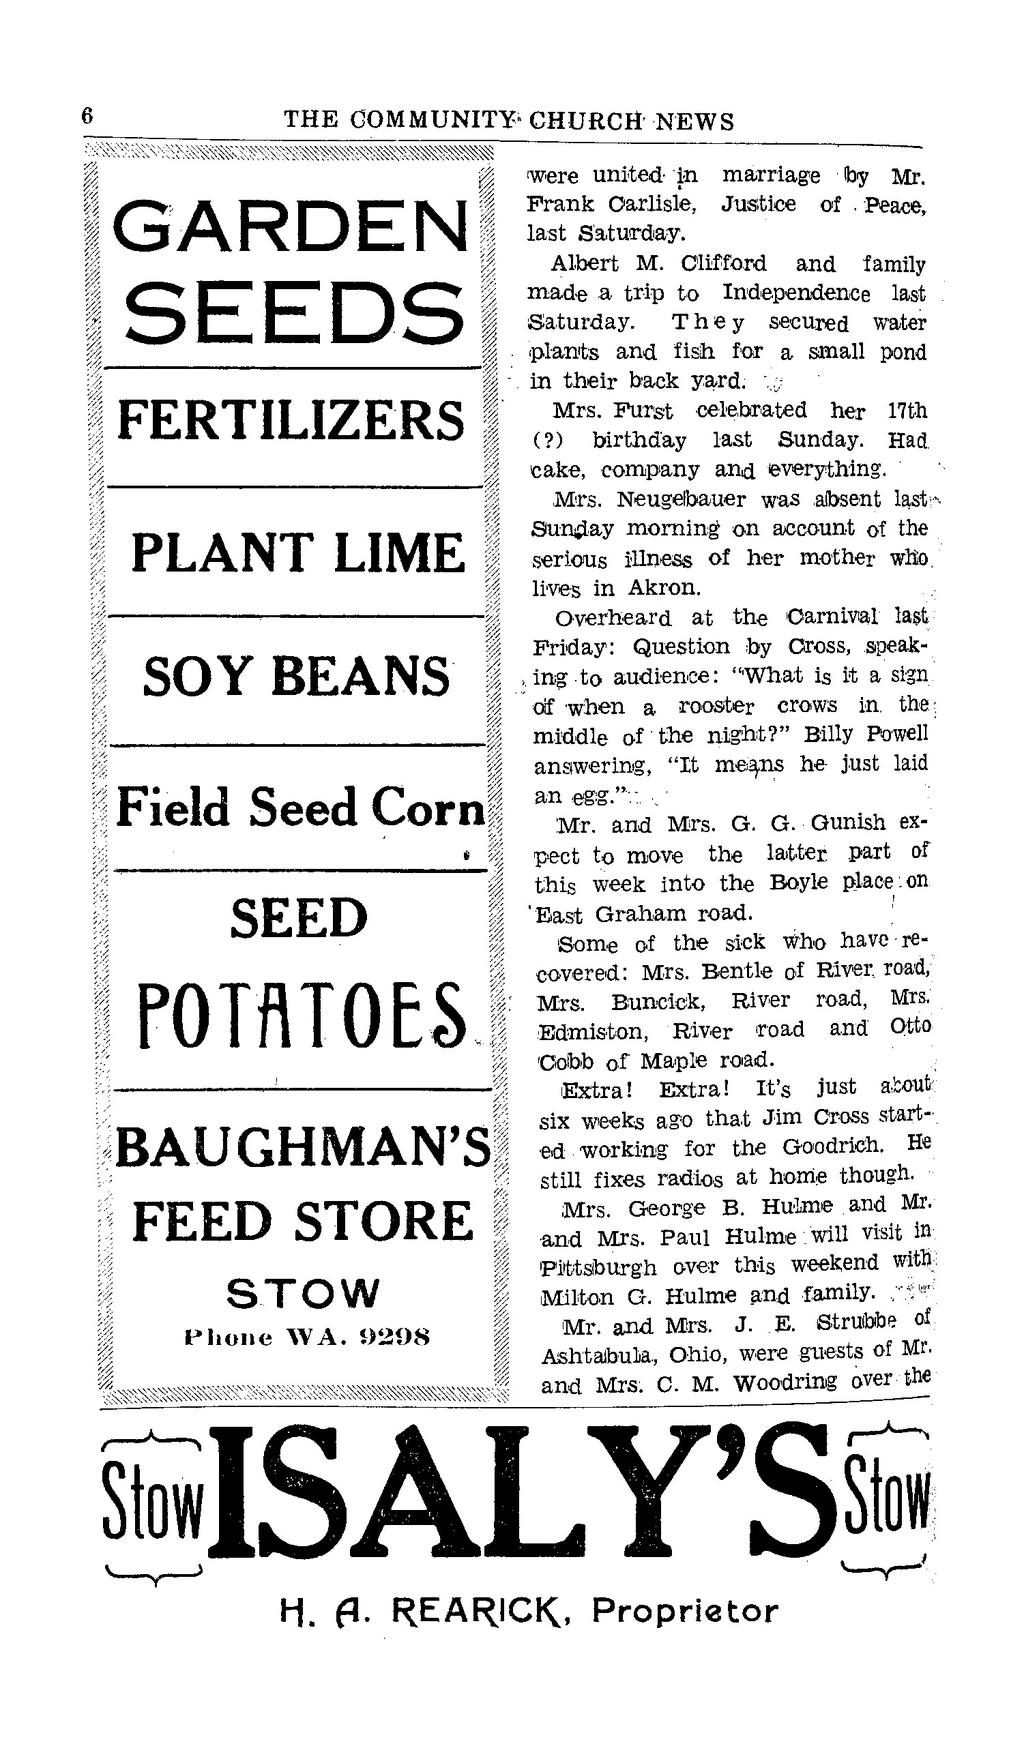 206 THE COMMUNITY CHURCH NEWS GARDEN FERTILIZERS PLANT LIME SOY BEANS Field Seed Corn i % SEED I POTATOES J BAUGHMAN'S FEED STORE STOW I Phone WA. 1)298 were united- in marriage by Mr.